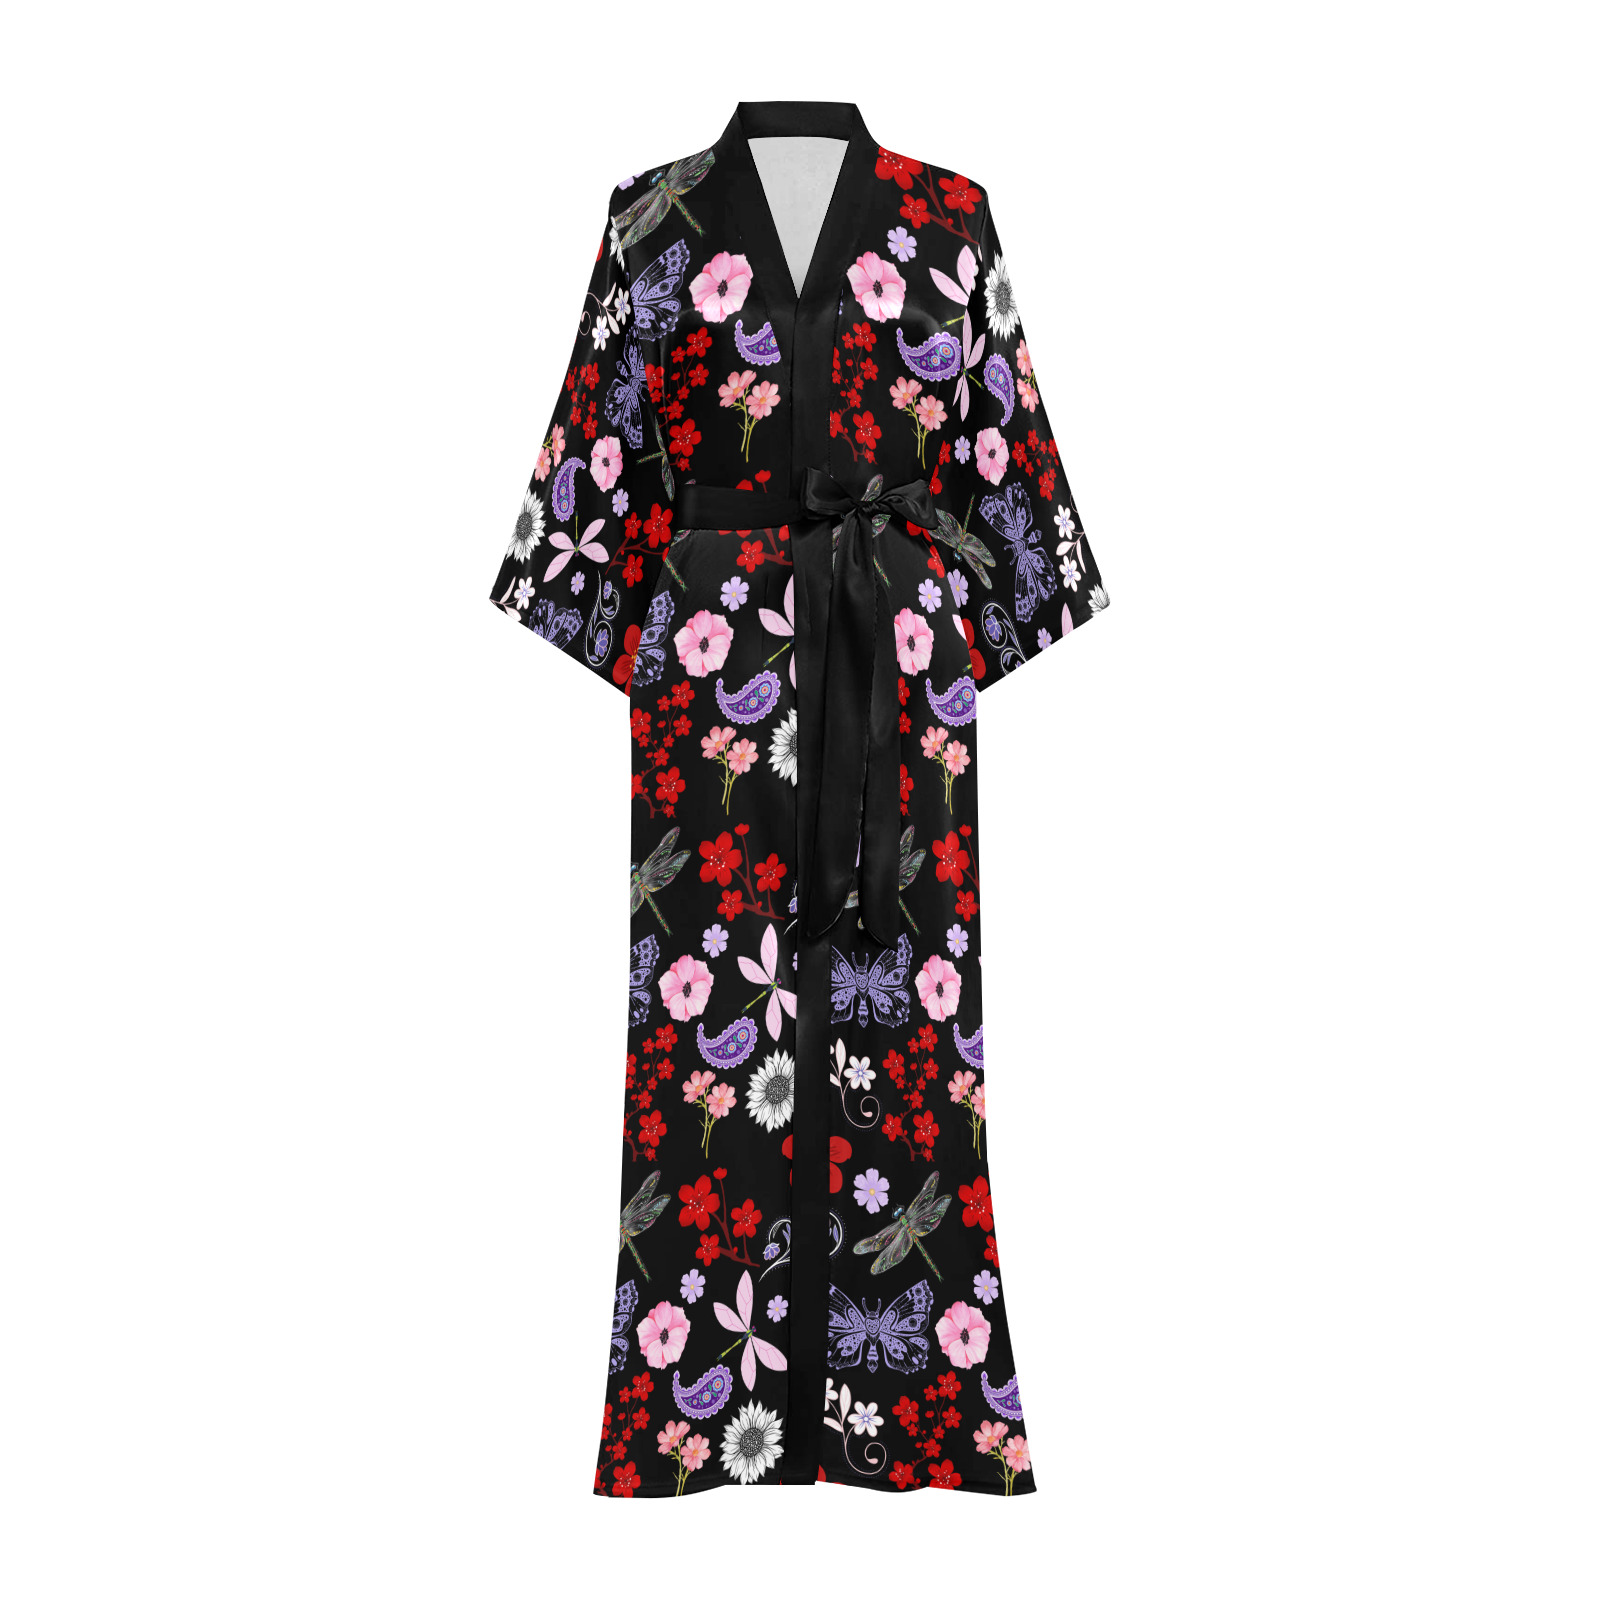 Black, Red, Pink, Purple, Dragonflies, Butterfly and Flowers Design Long Kimono Robe